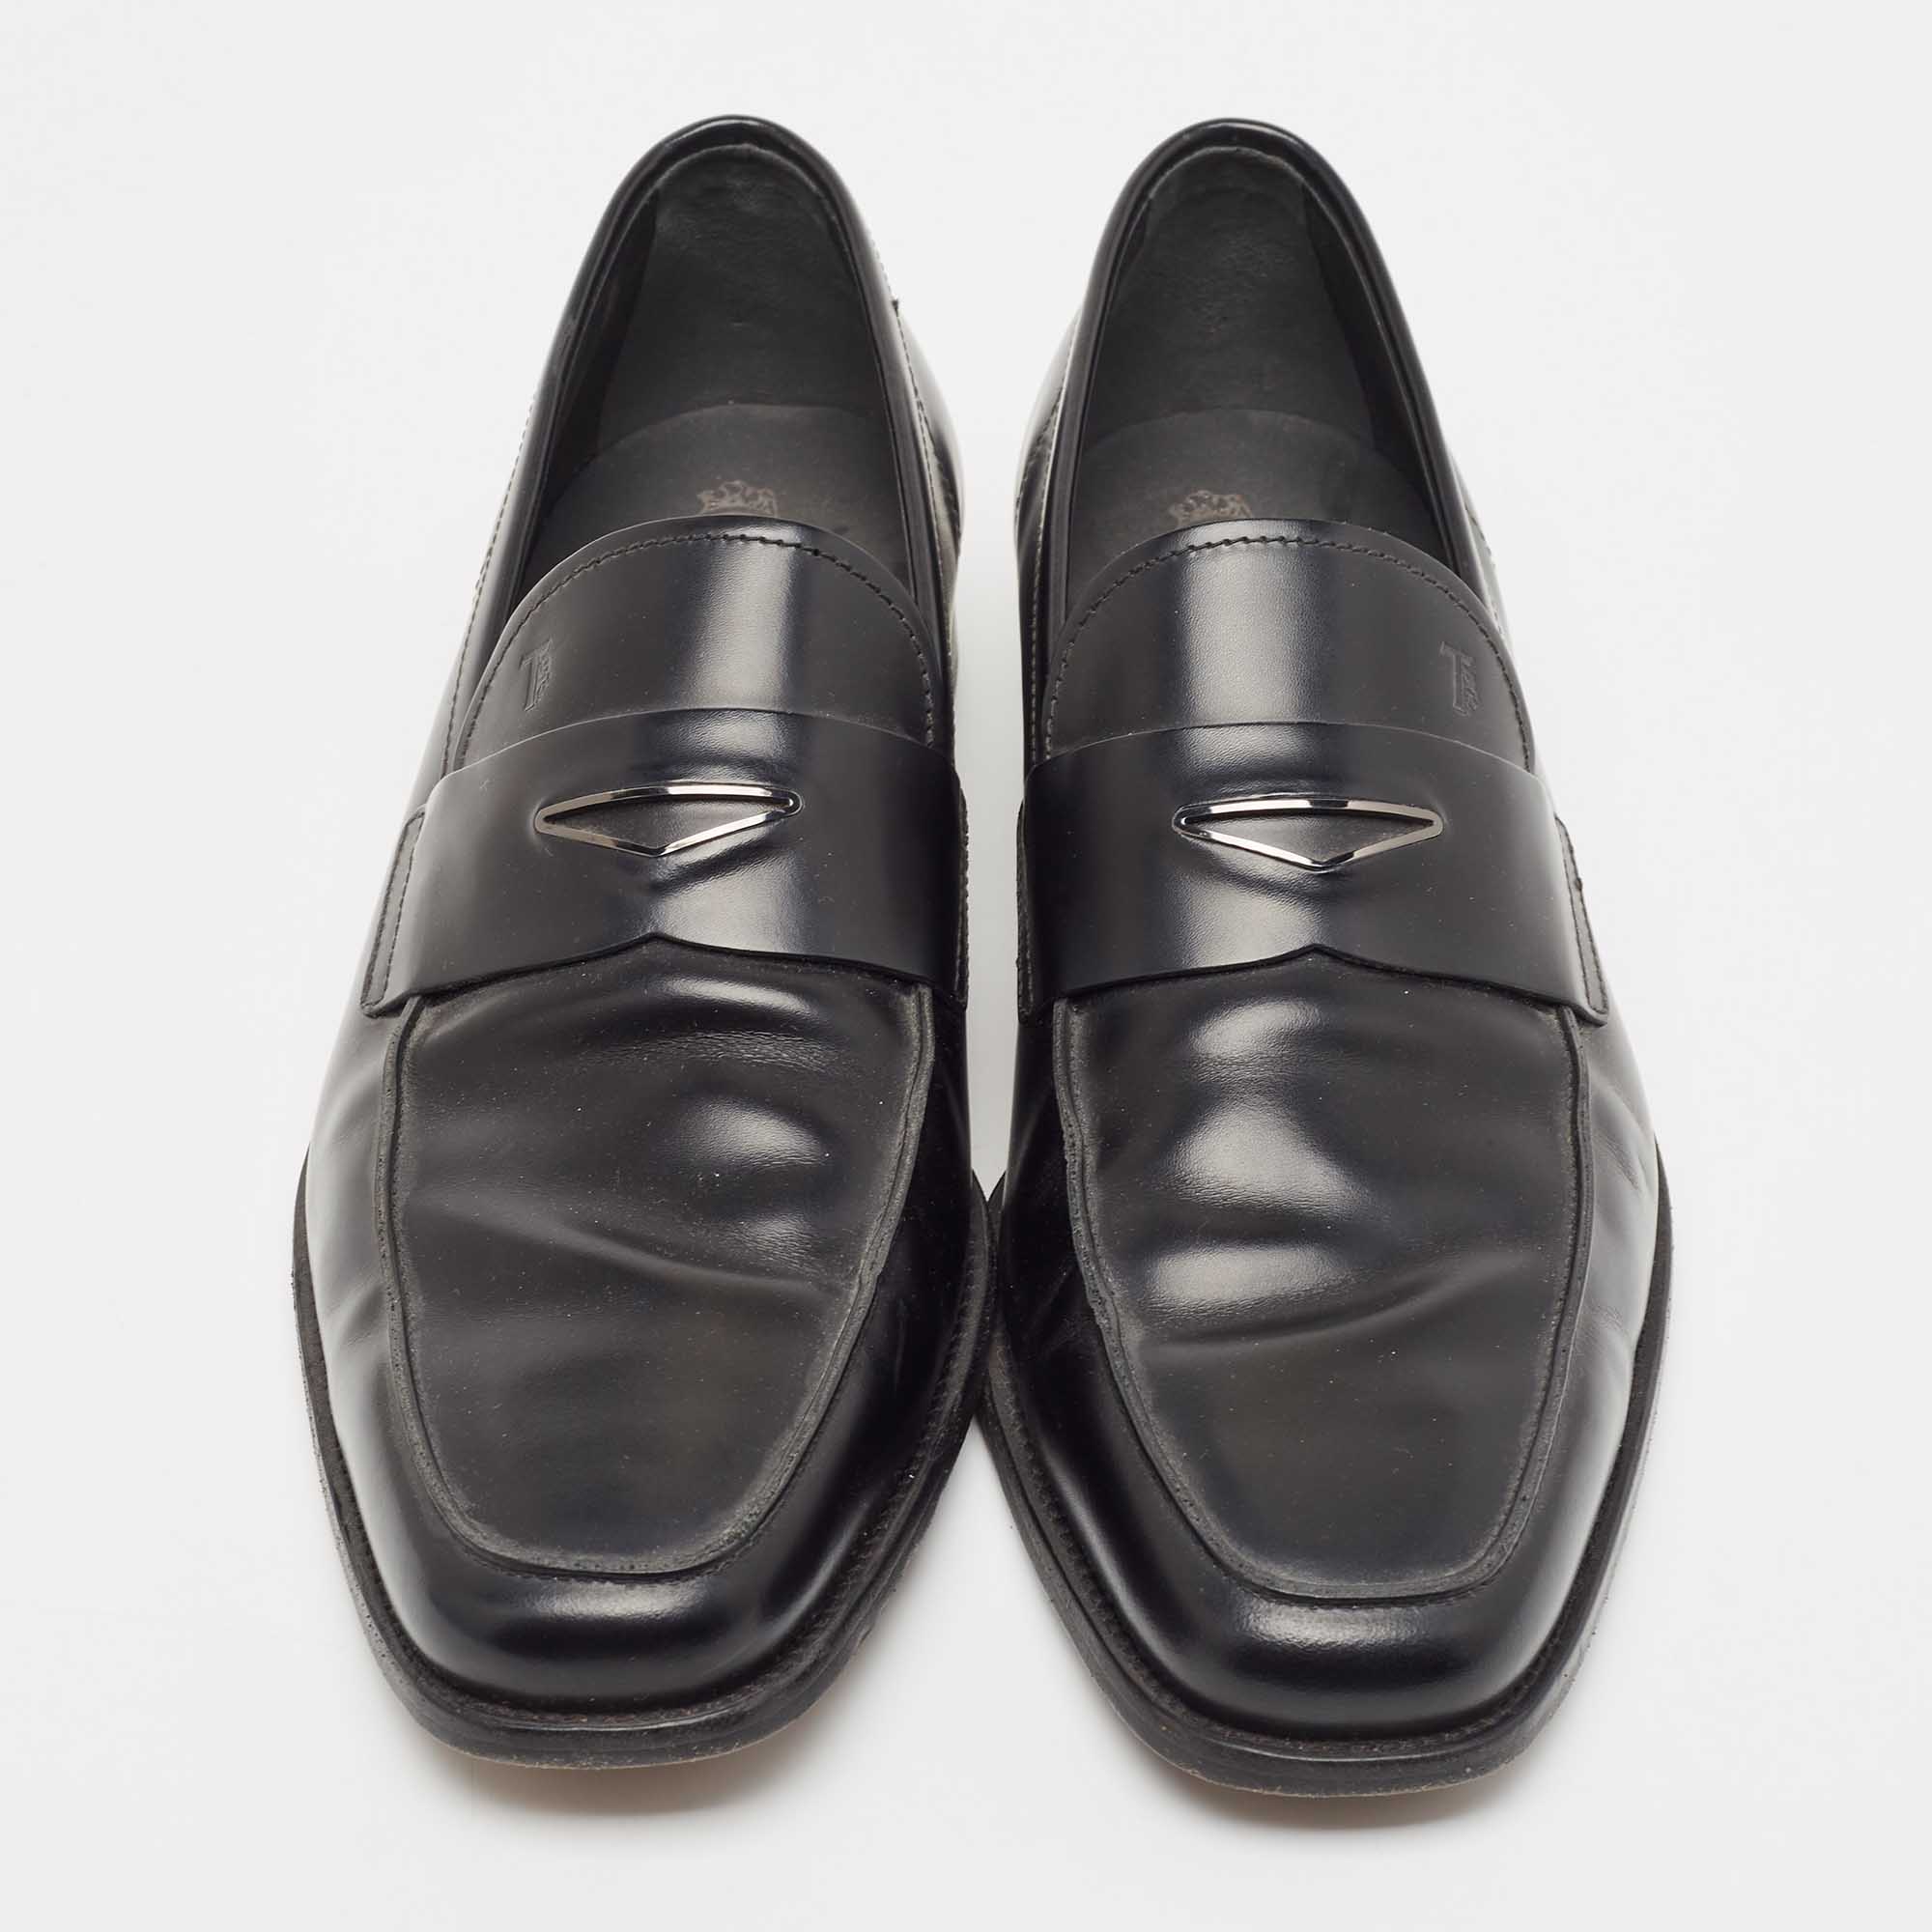 Tod's Black Leather Penny Loafers Size 44.5